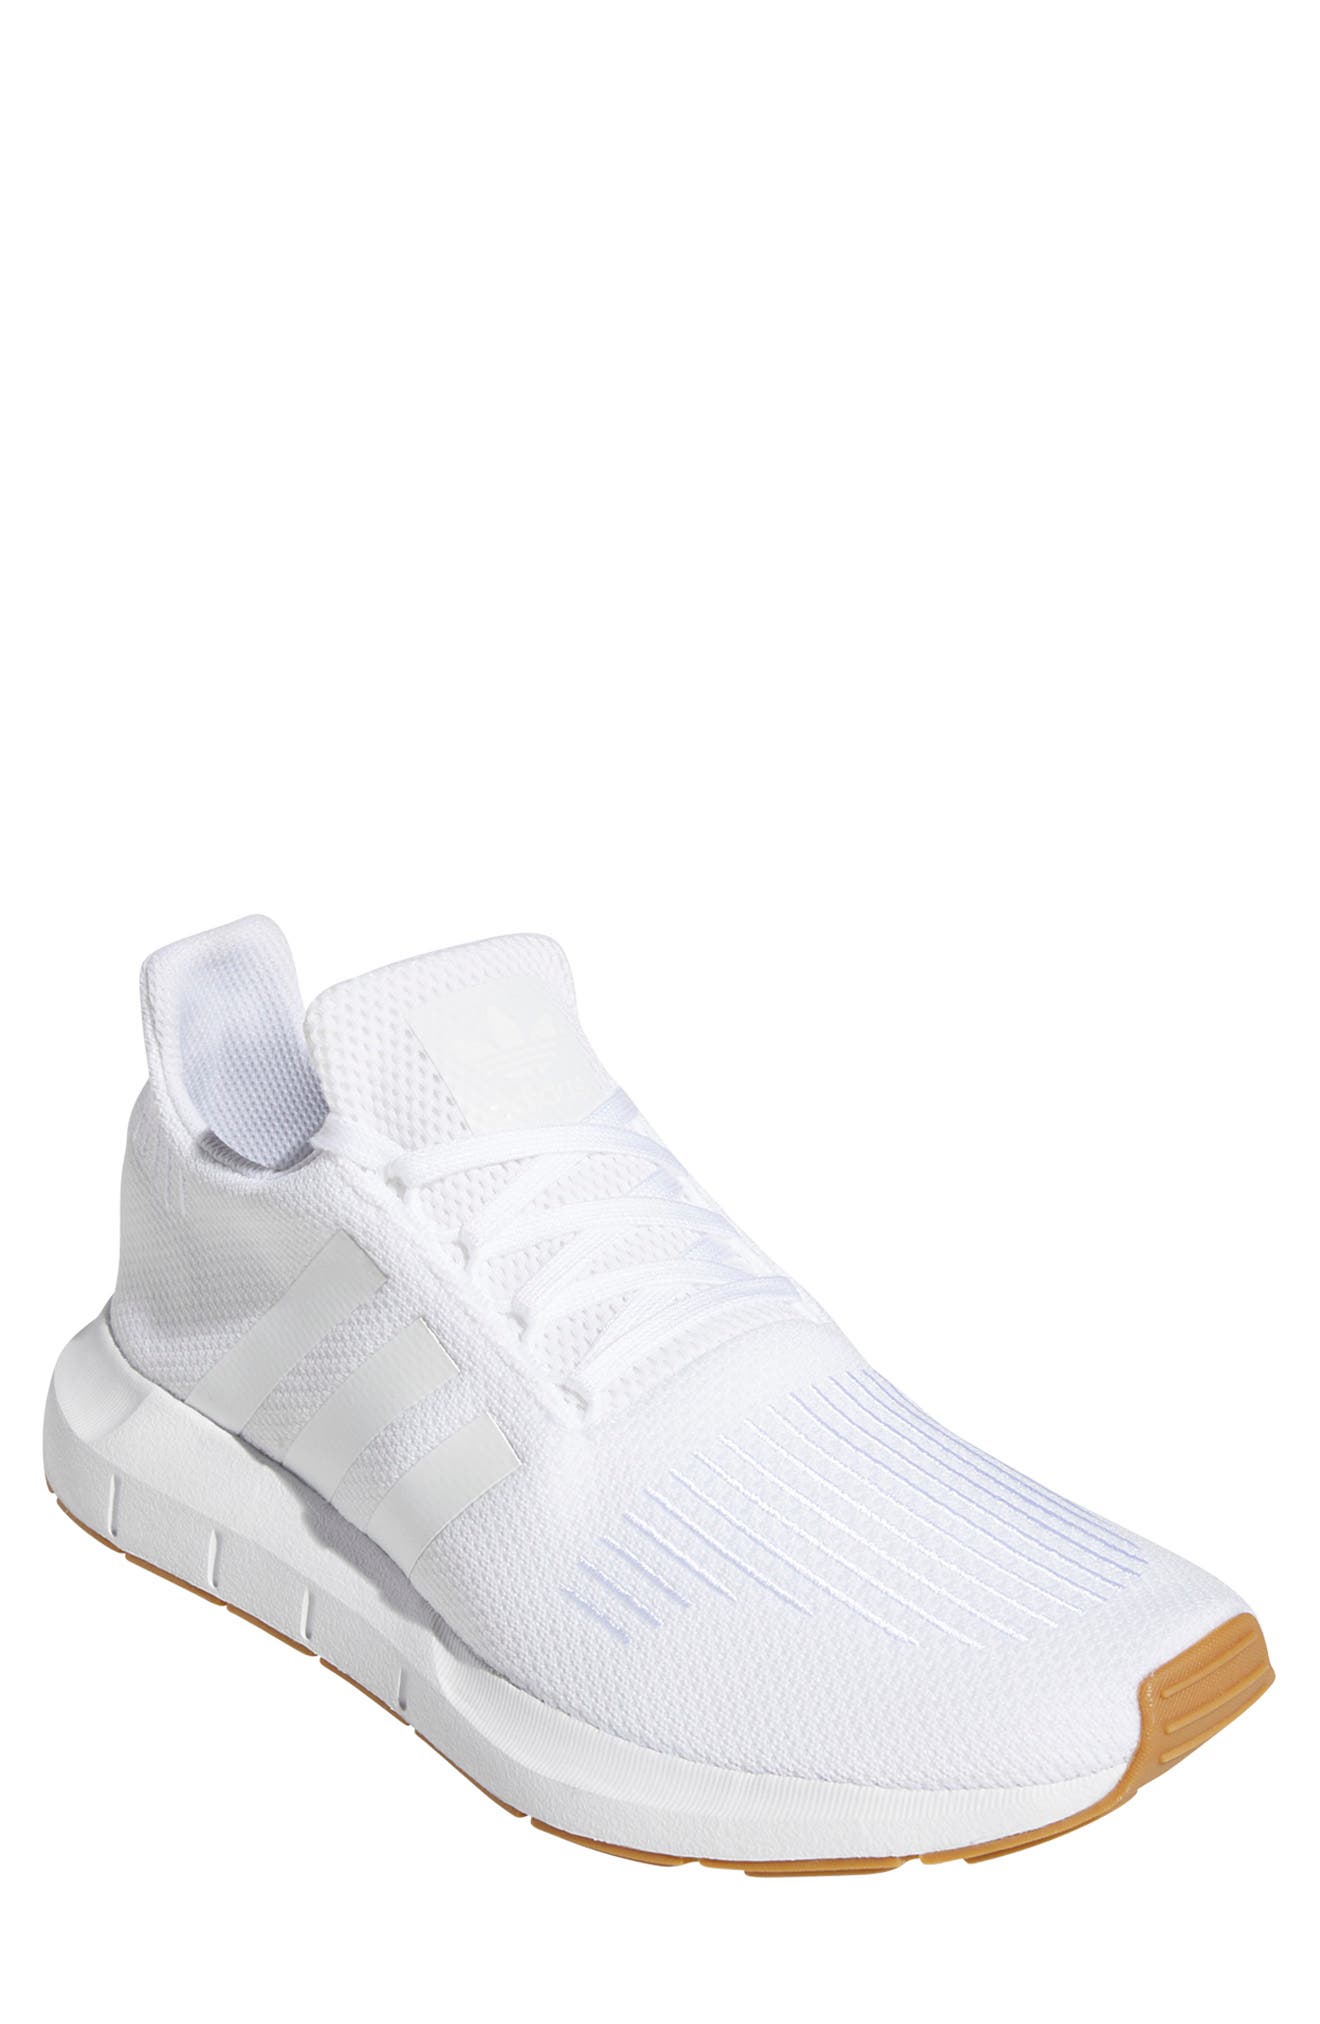 nordstrom mens white shoes